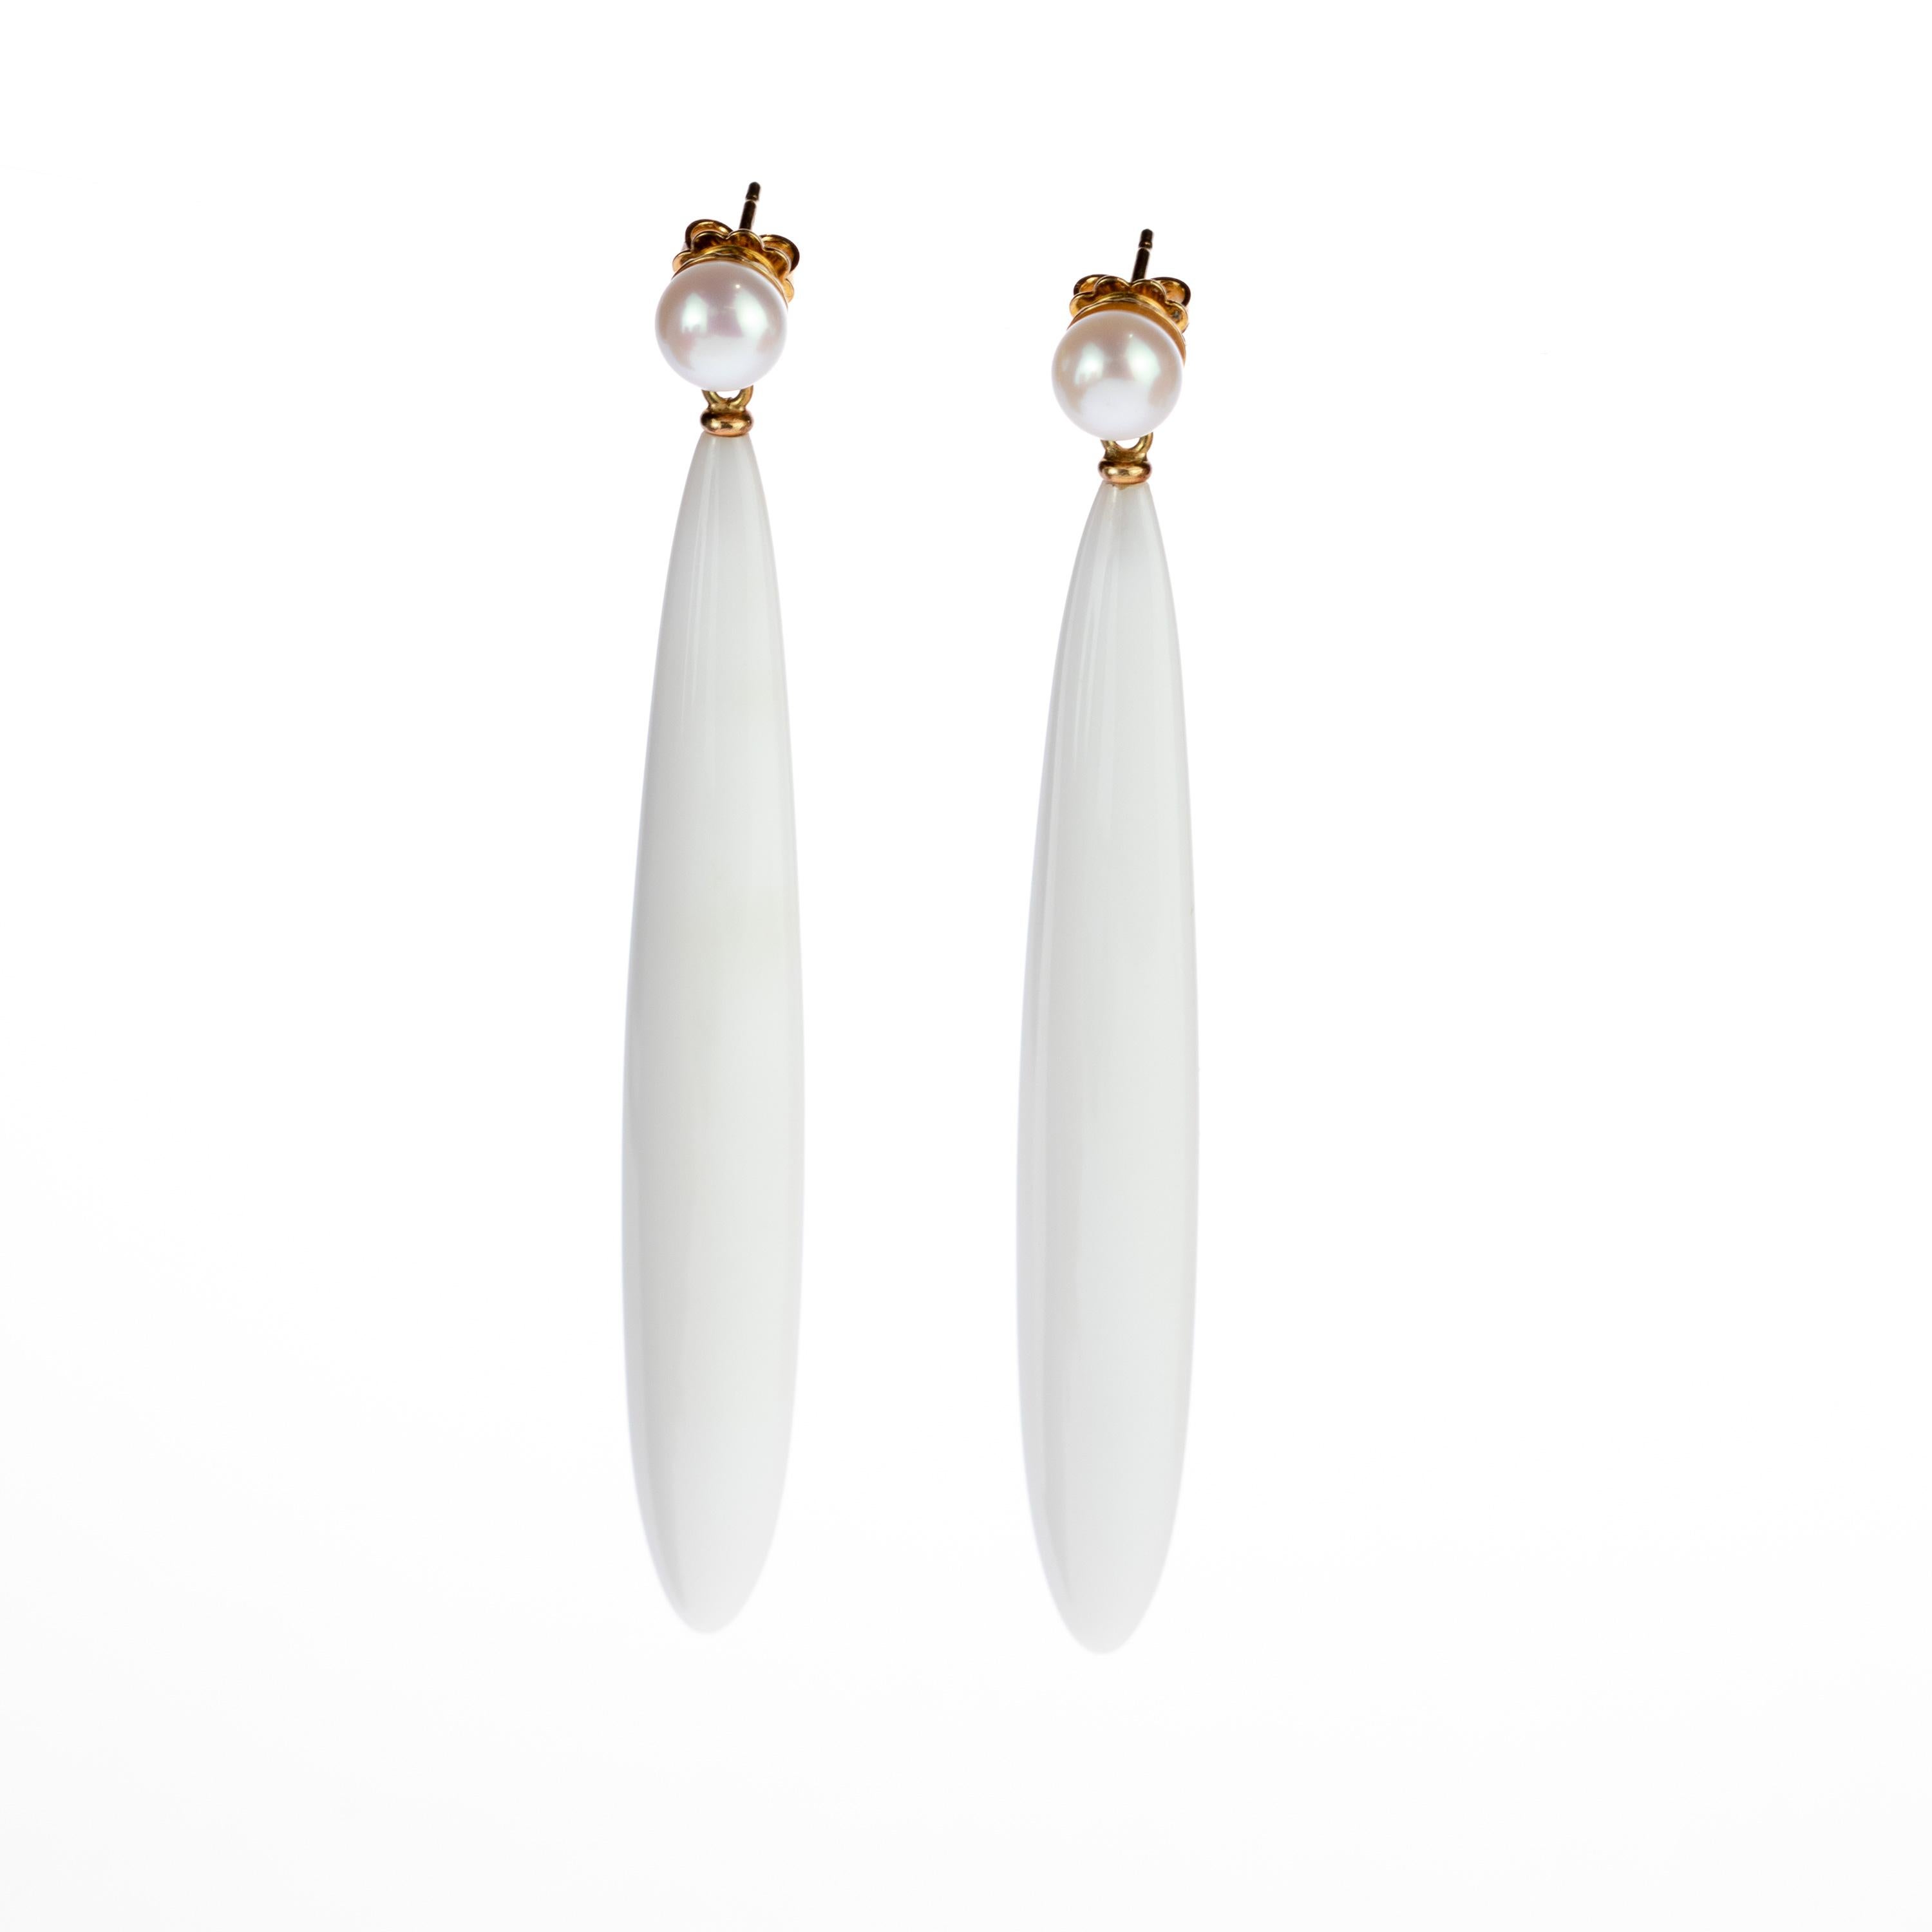 Stunning and mistic crafted white bull agate earrings with round freshwater 0.6 cm pearls. Flat drops and fantastic gems holded by delicate 18 karat yellow gold details. Evoking all the italian tradition resulting in a stunning masterpiece, with an